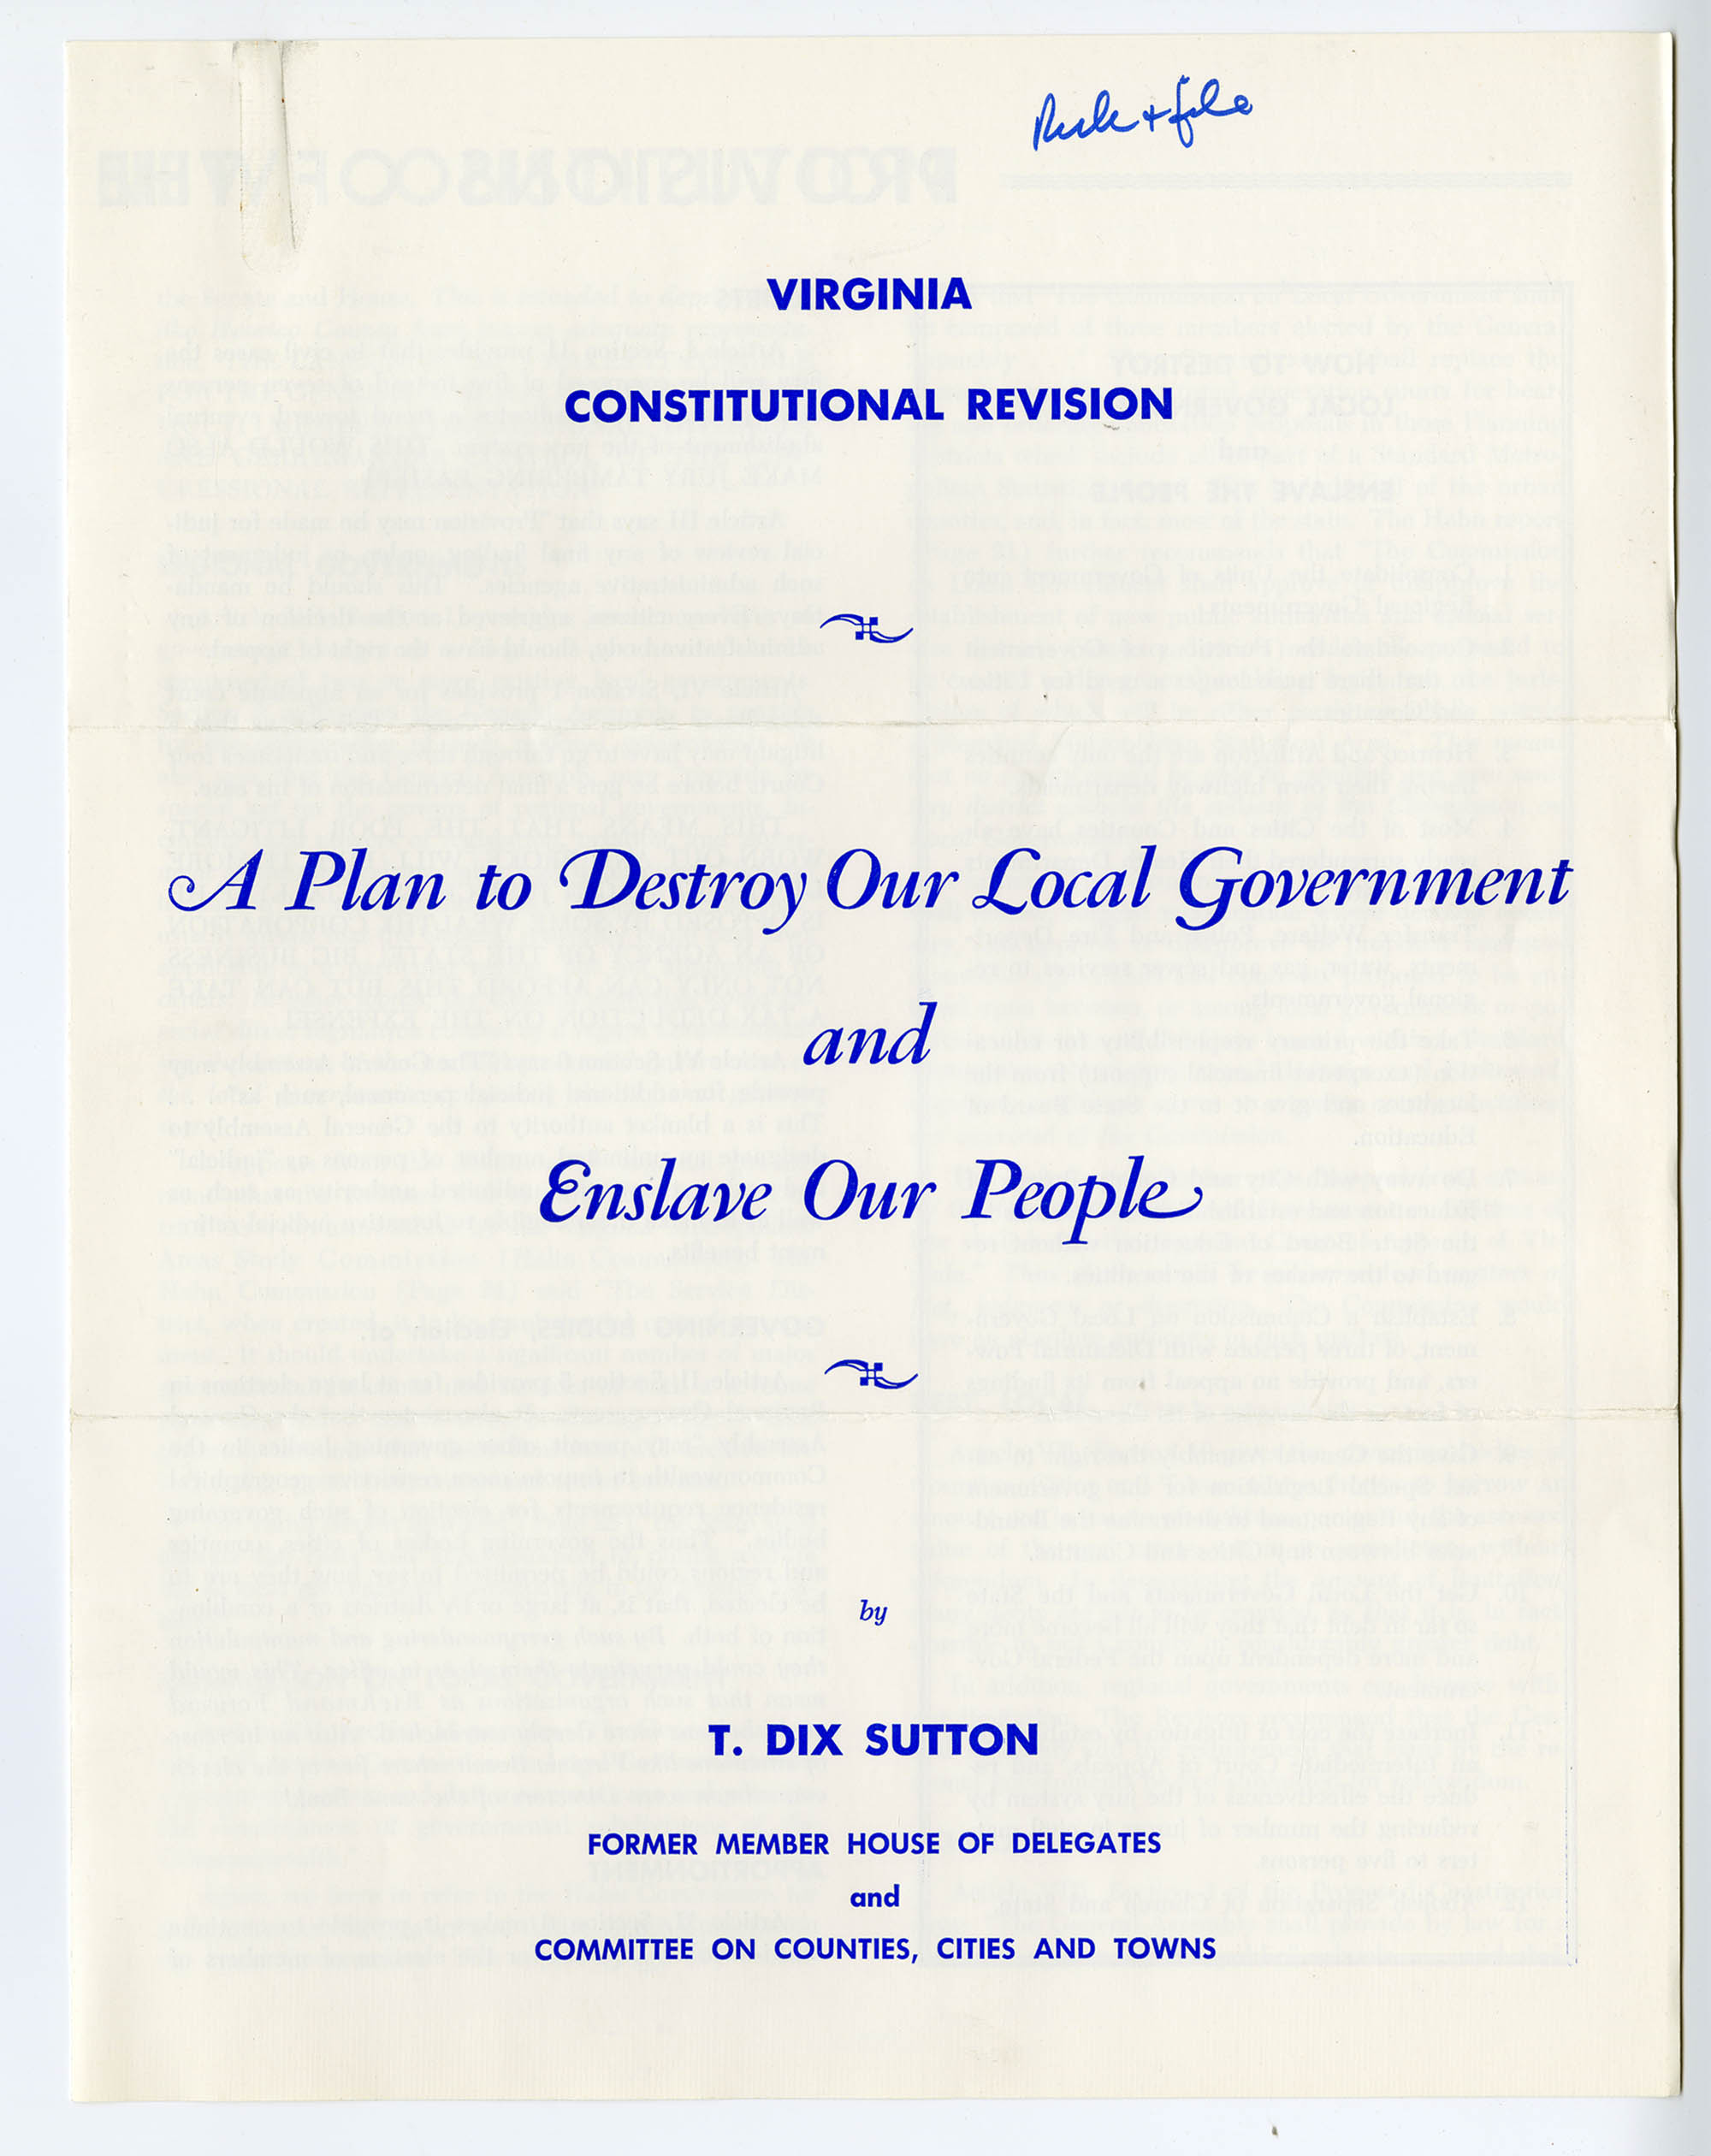 'Virginia Constitutional Revision: A Plan to Destroy Our Local Government & Enslave Our People' by T. Dix Sutton. From Virginia. Governor (1970-1974: Holton), Executive Papers, 1970-1974. Accessions 28050, Box 40, 'Before Inauguration' Folder. Library of Virginia.